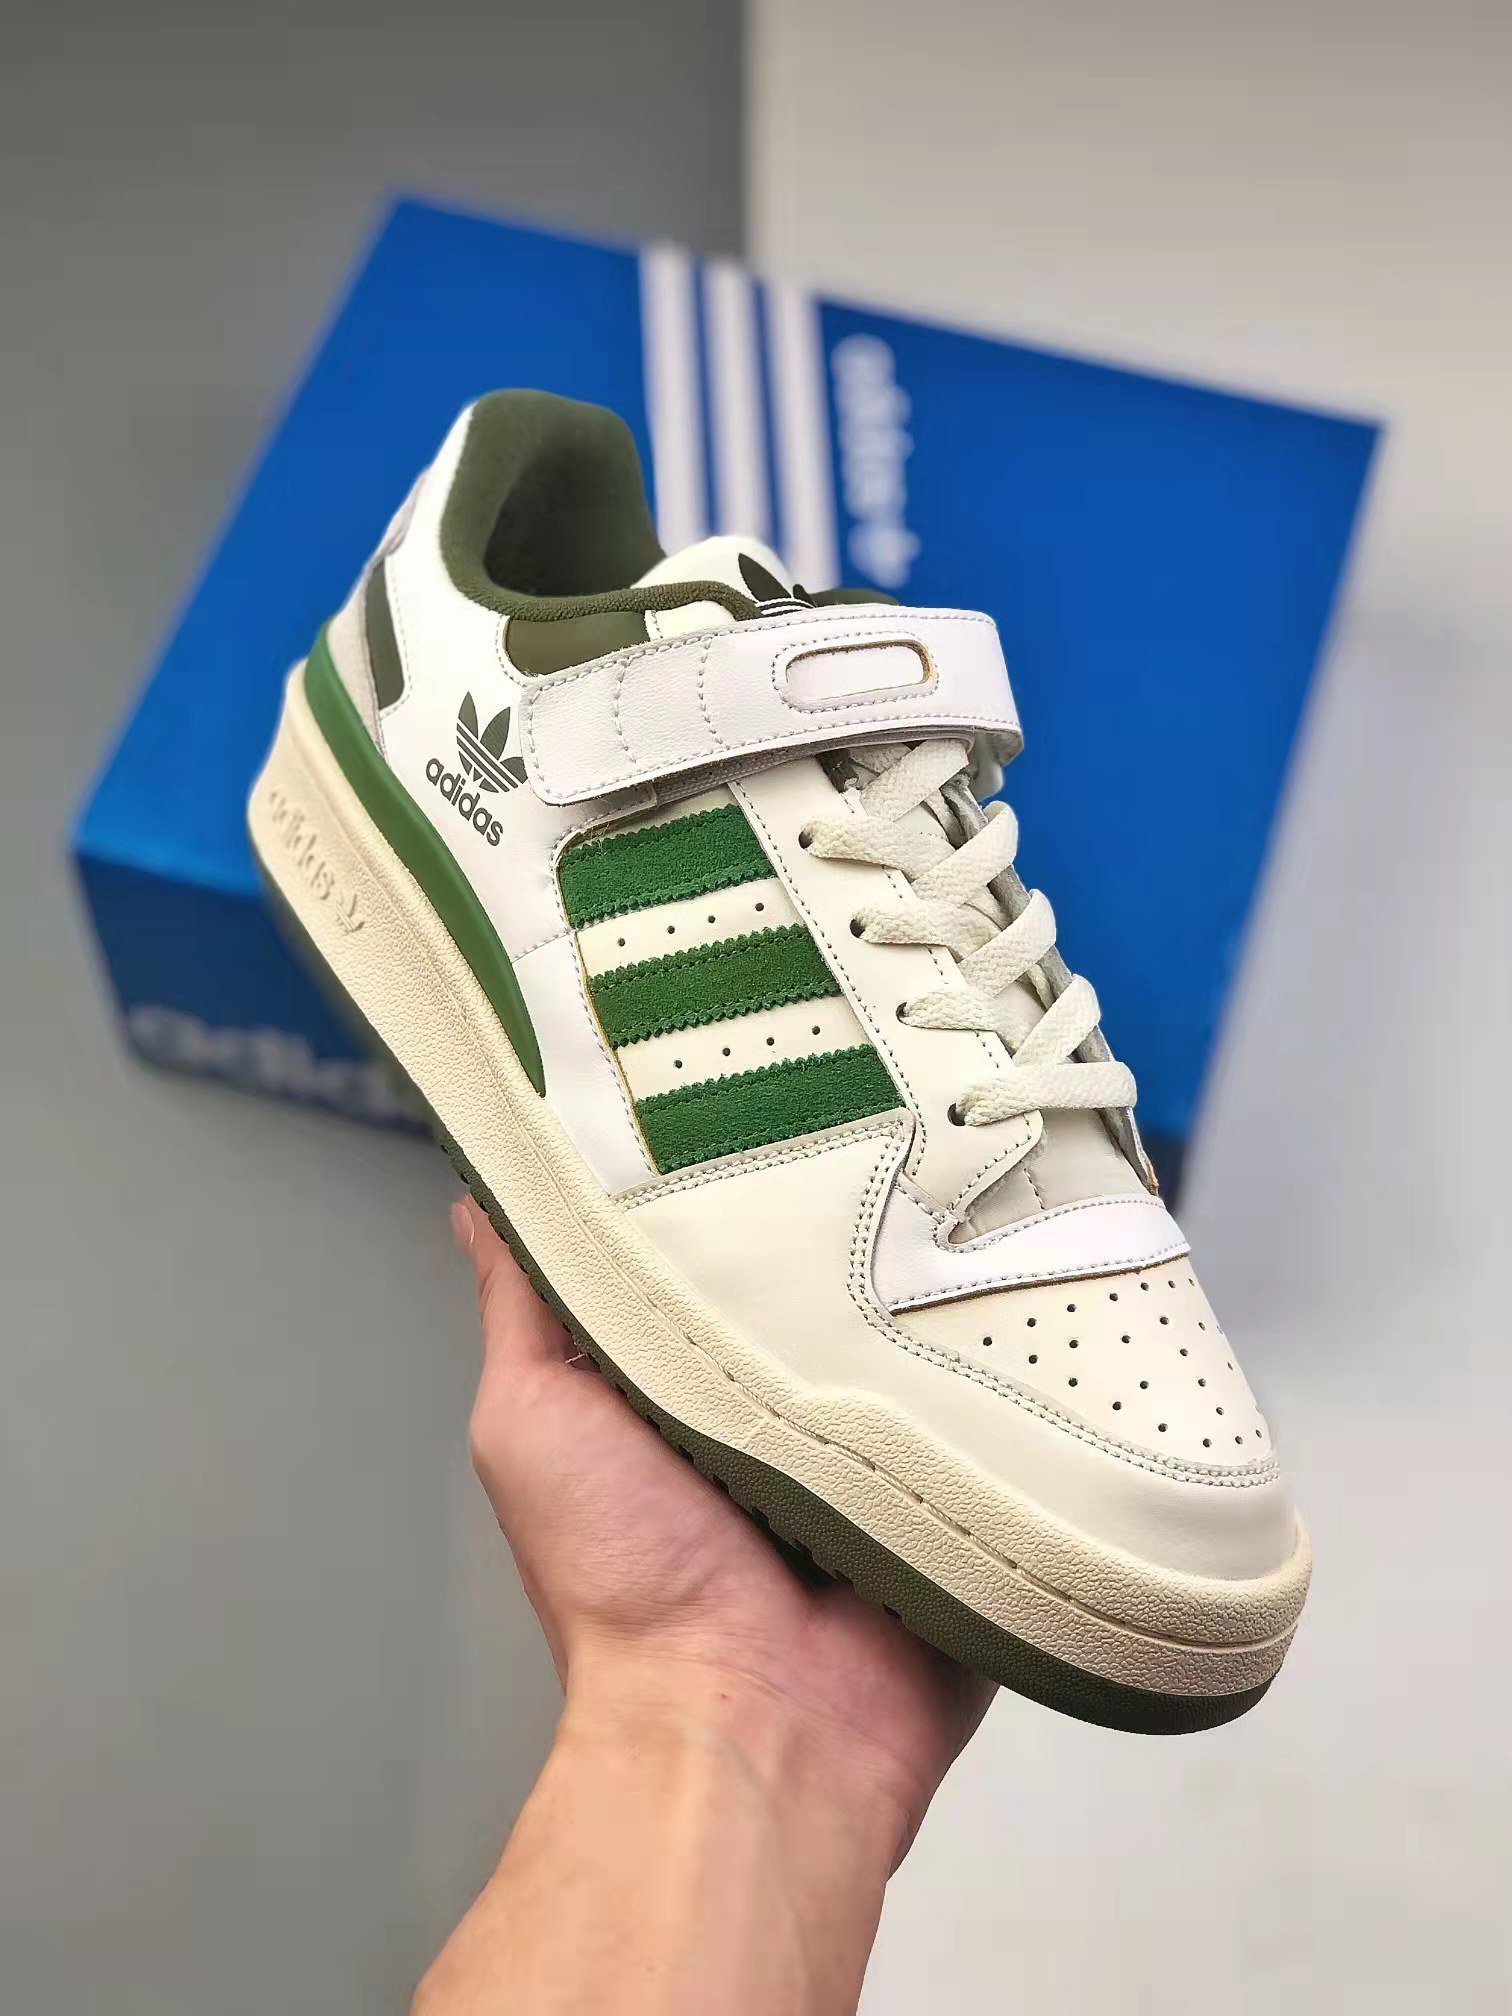 Adidas Forum 84 Low 'White Crew Green' FY8683 - Stylish and Versatile Footwear | Shop Now